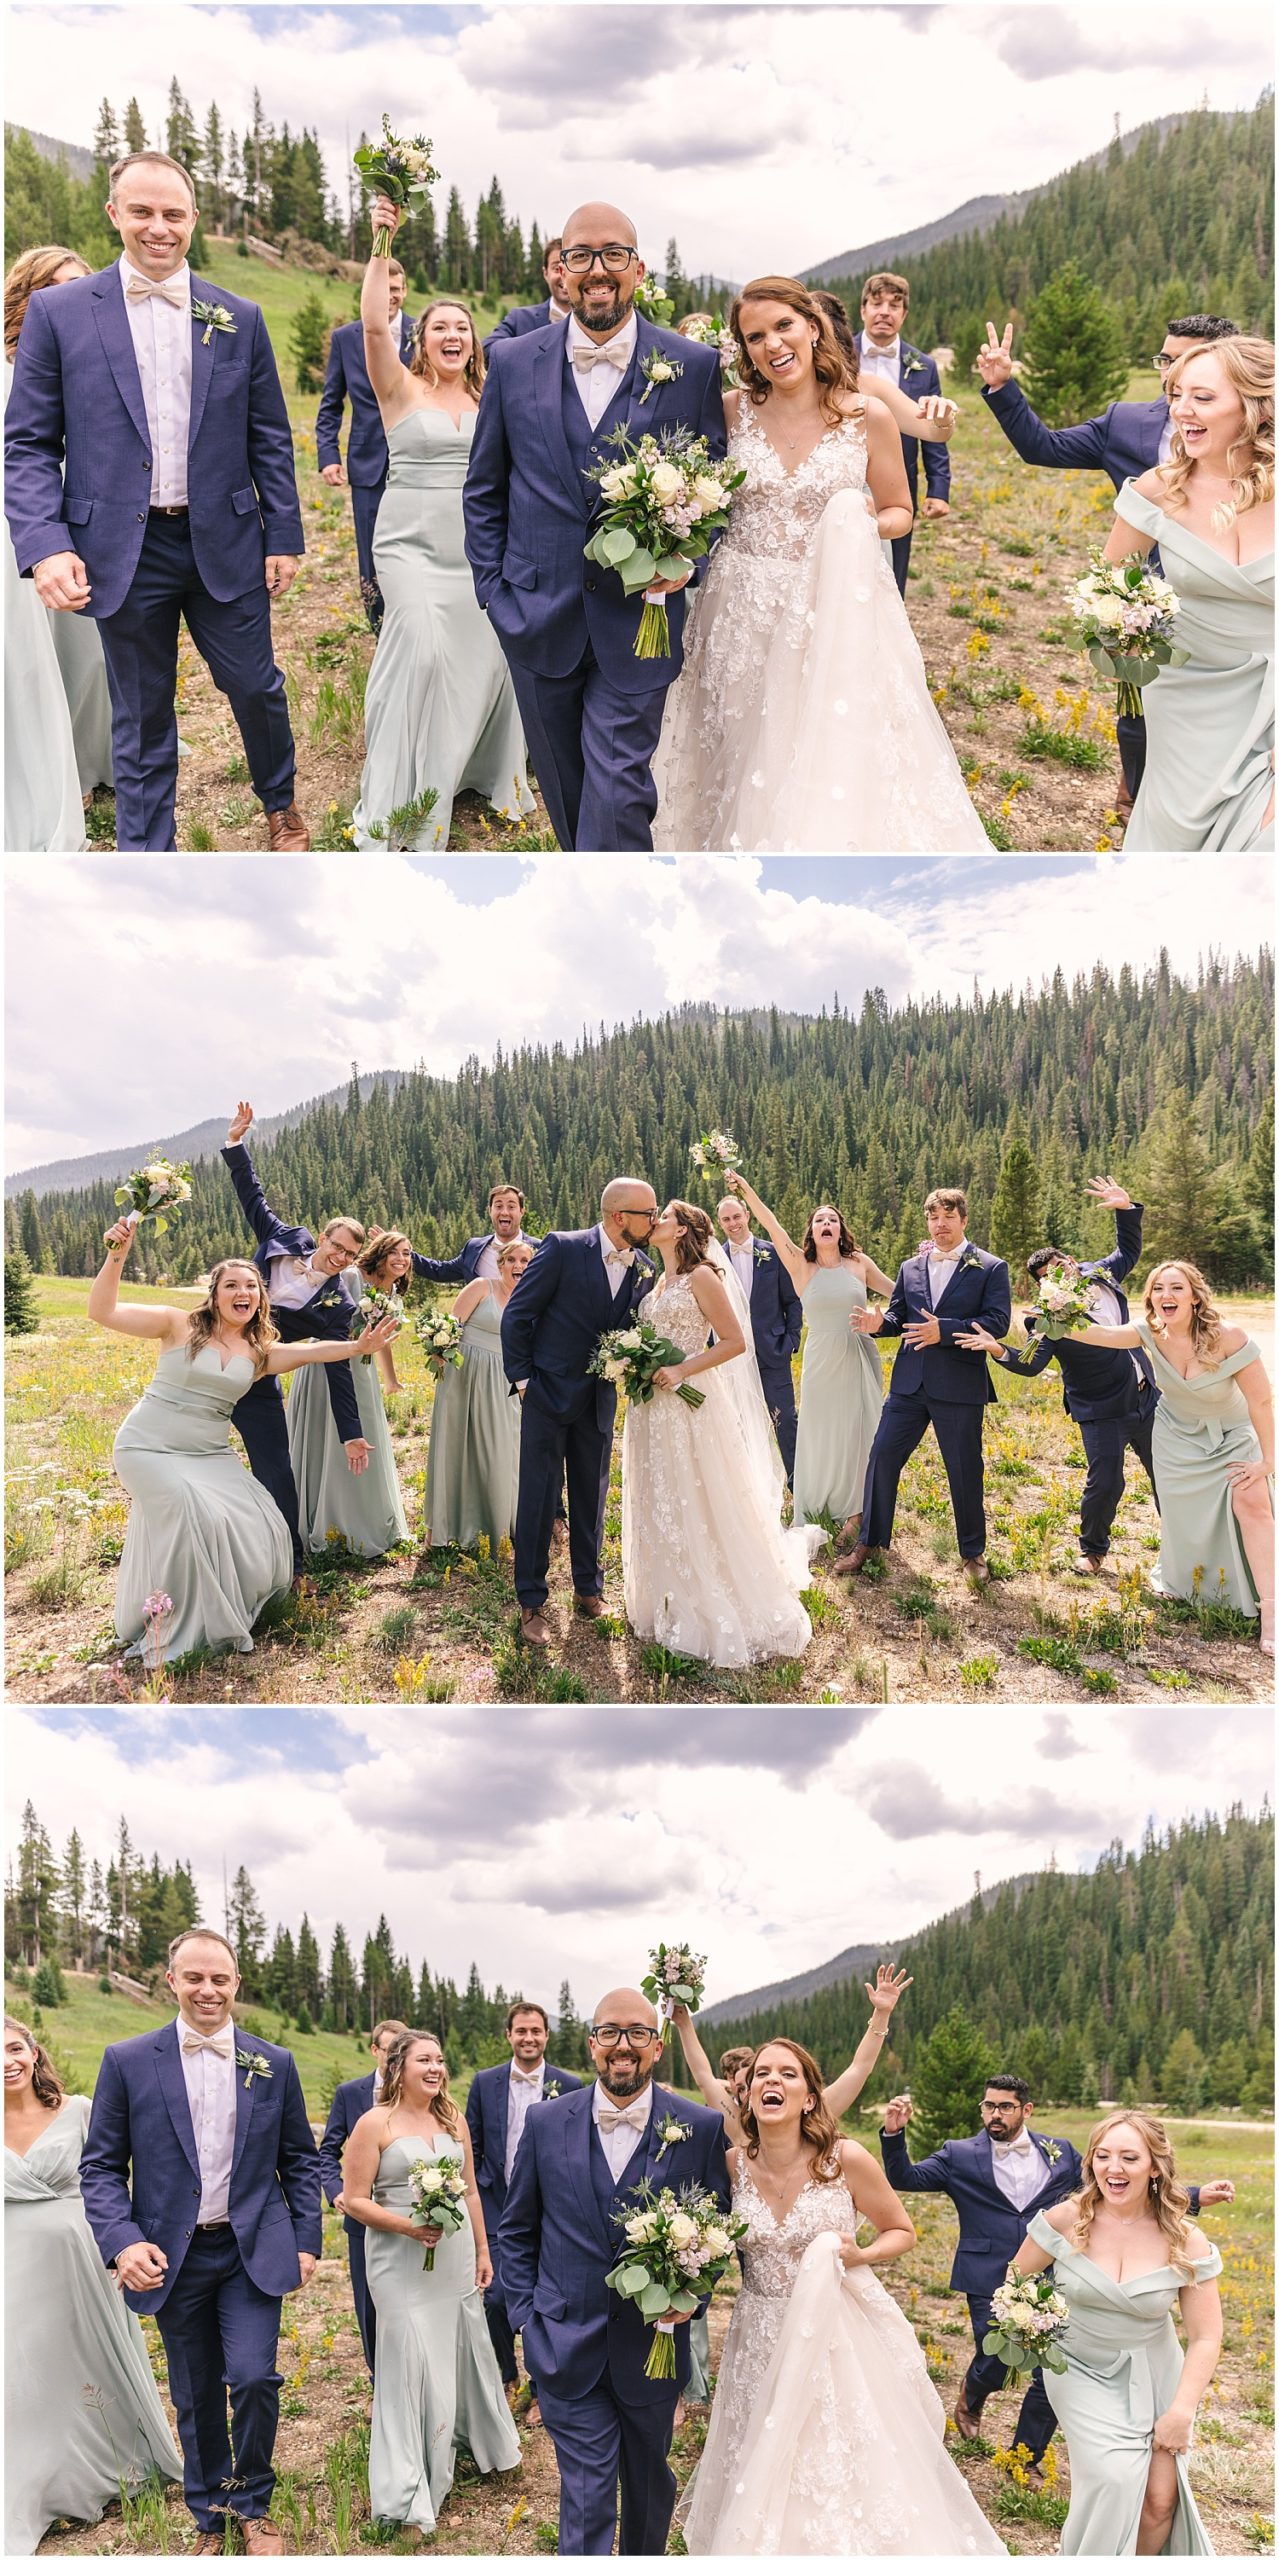 Silly wedding party portraits with mountain views near Winter Park Colorado